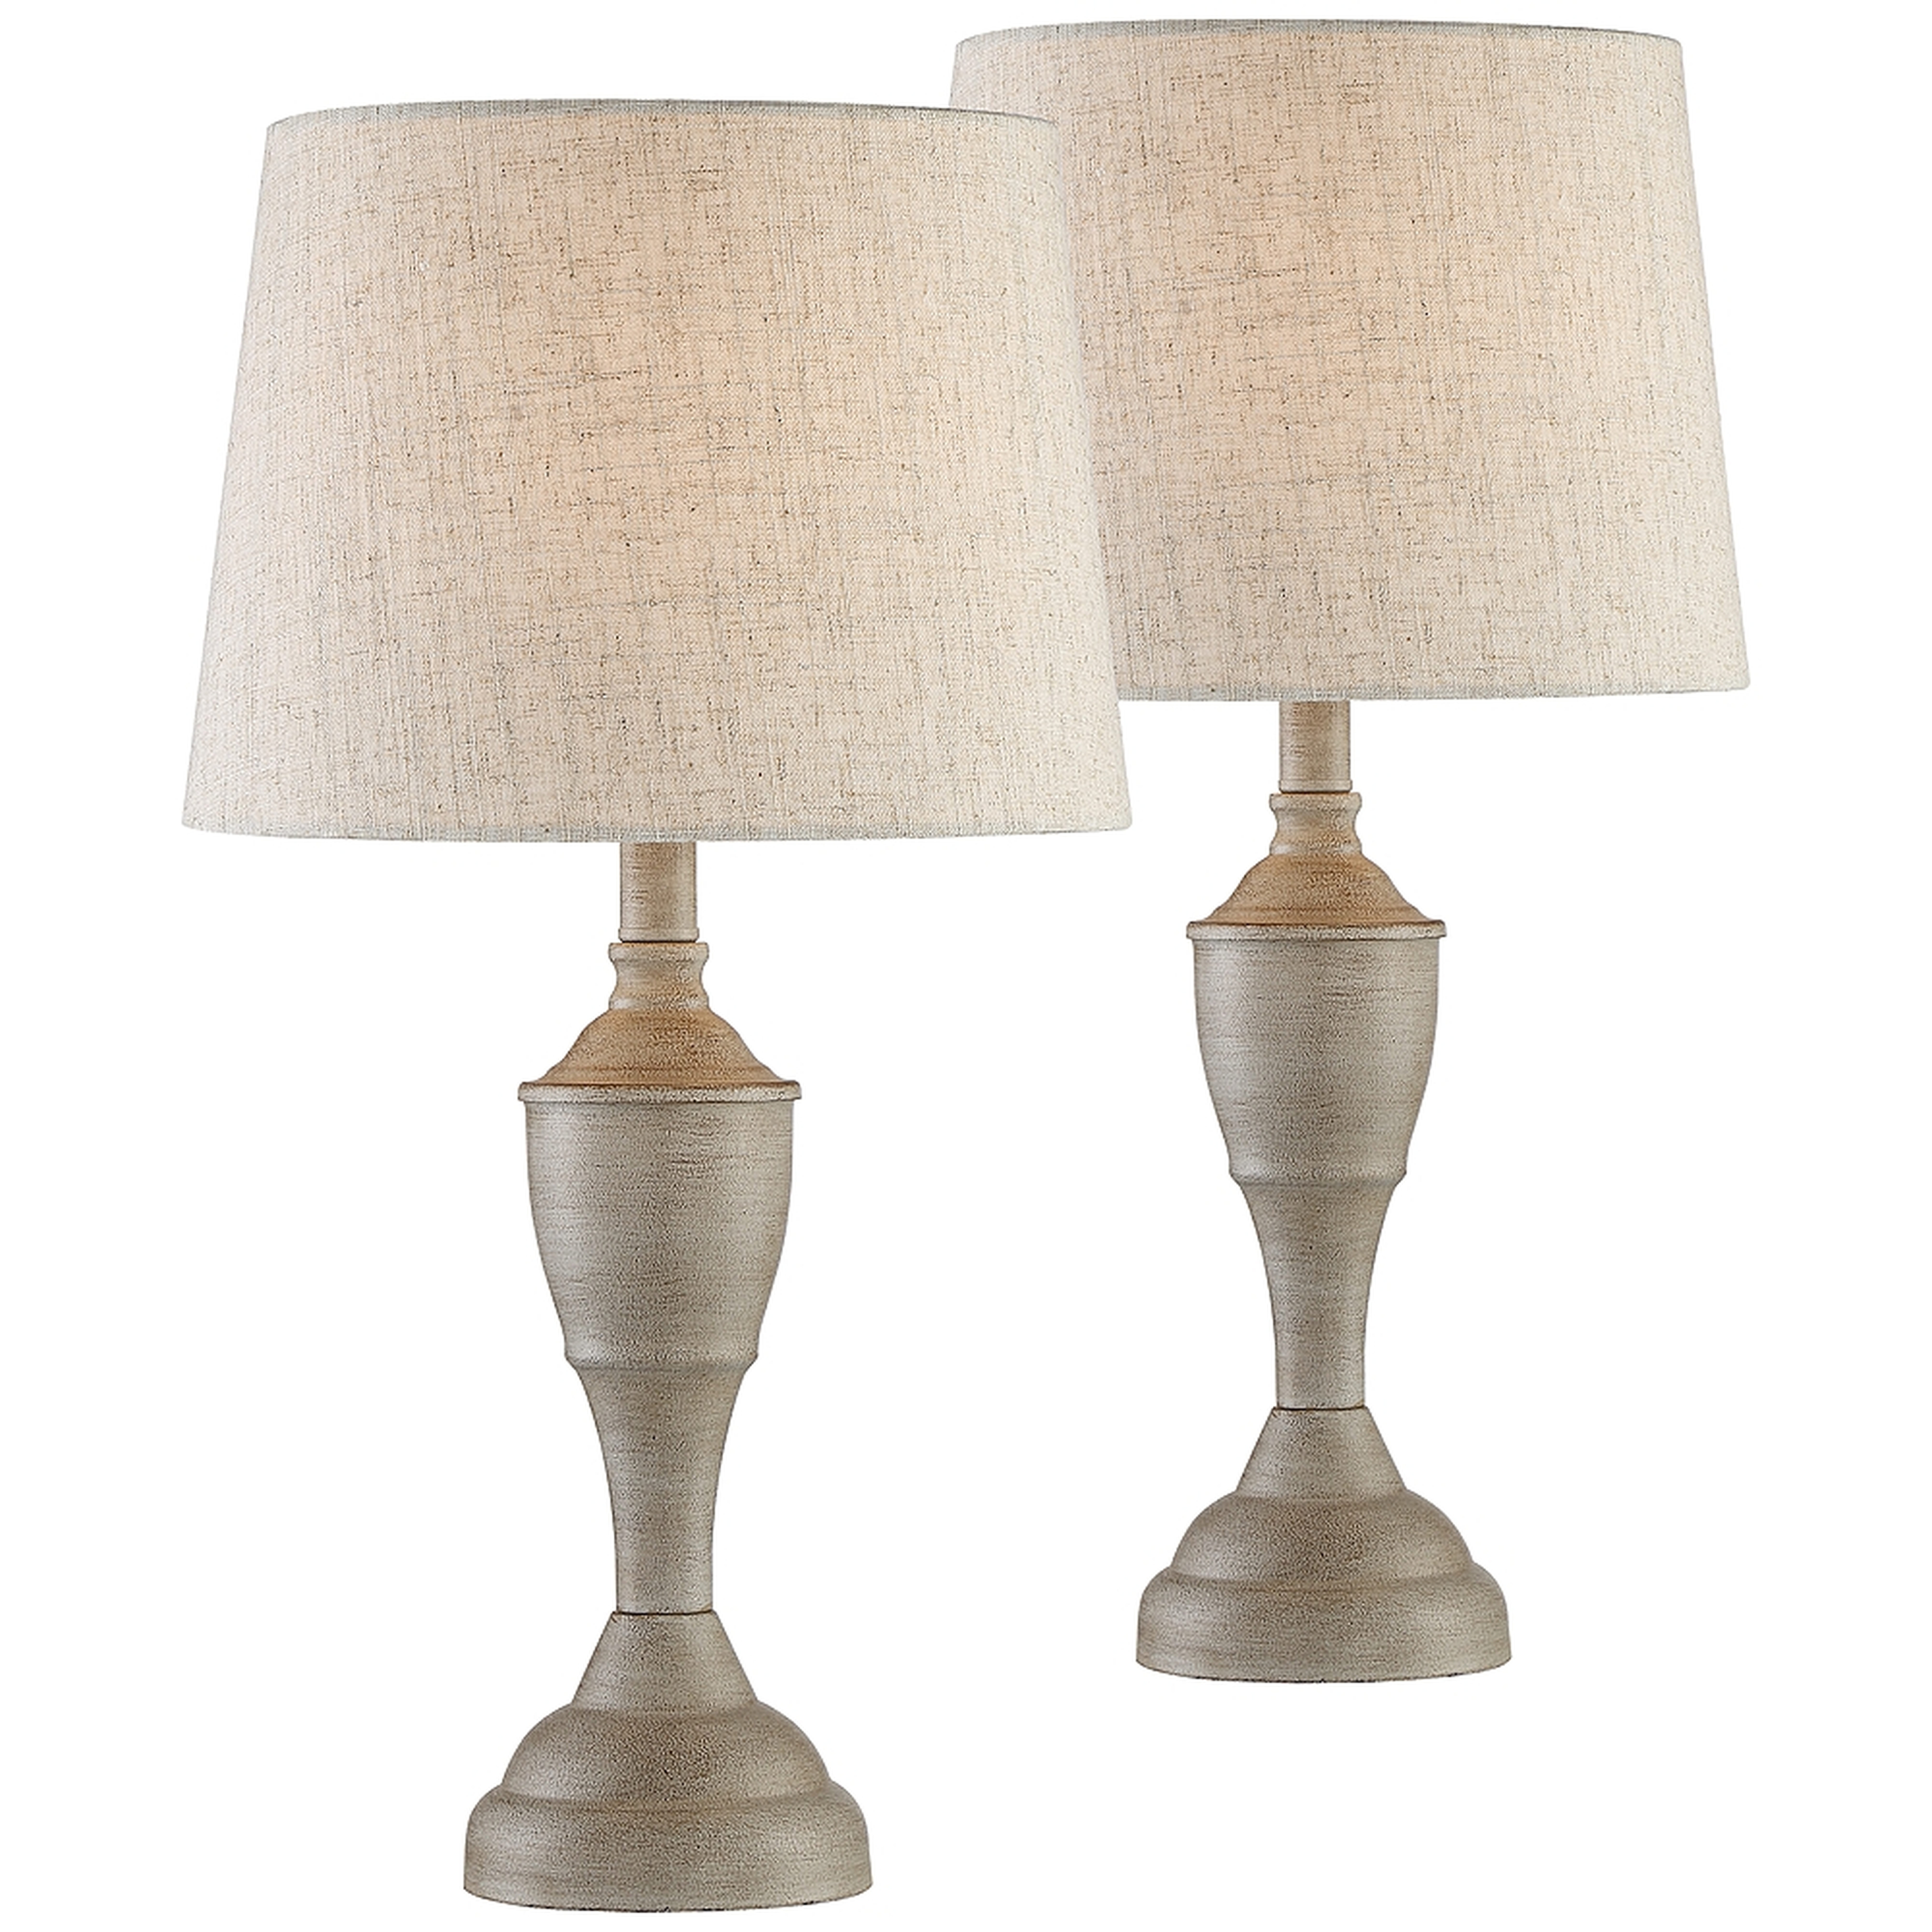 Claude Beige Washed Accent Table Lamps Set of 2 - Style # 74V05 - Lamps Plus